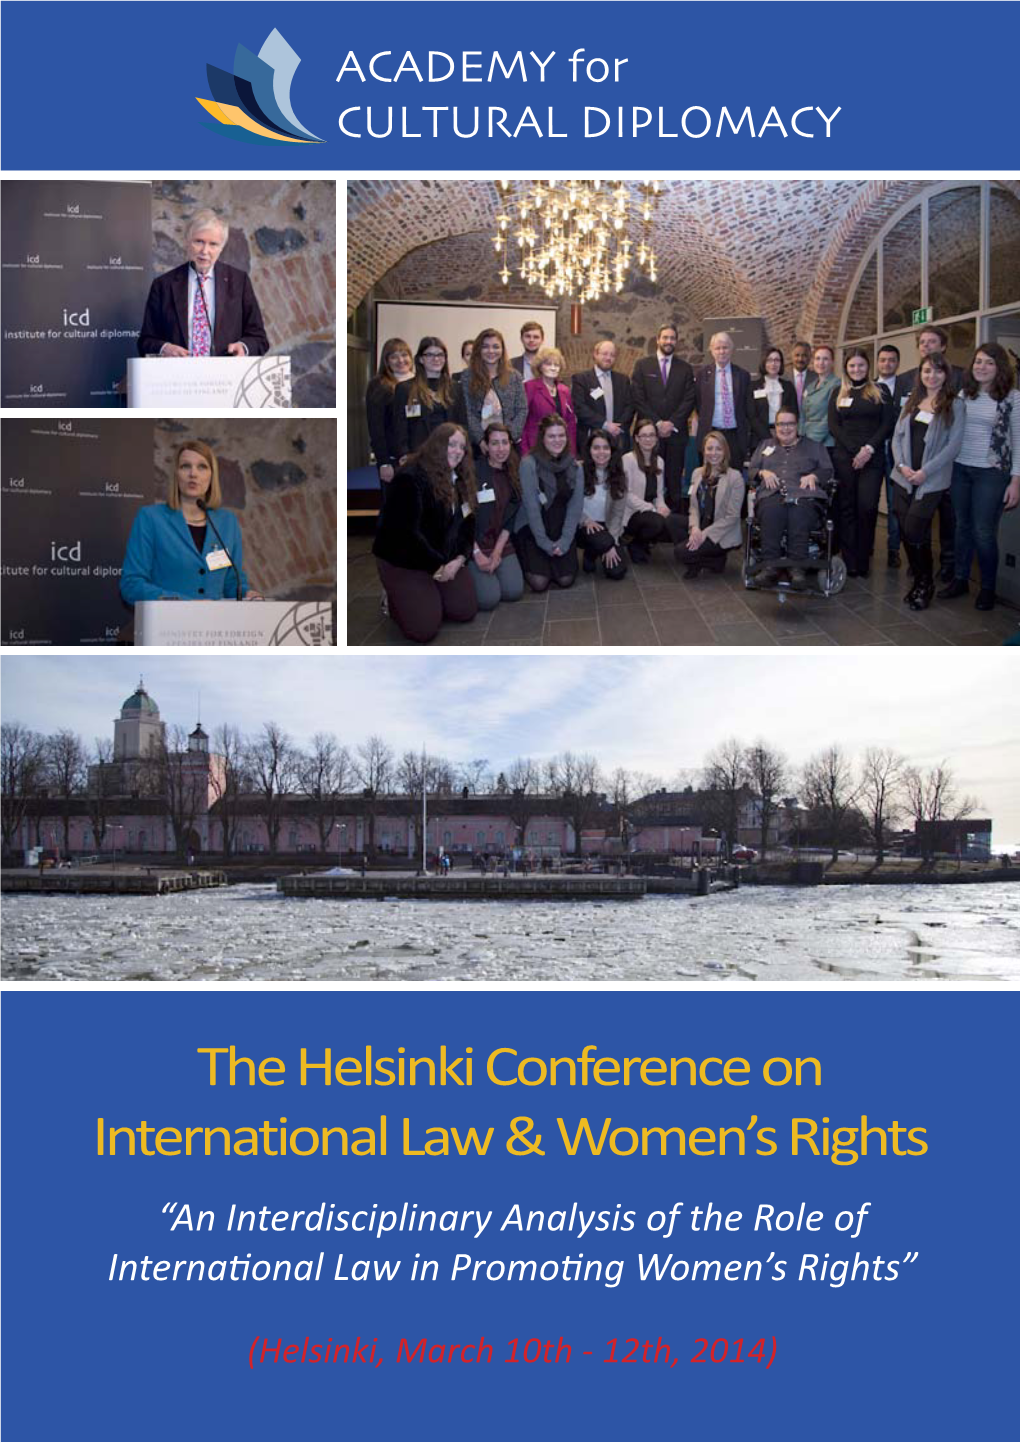 The Helsinki Conference on International Law & Women's Rights